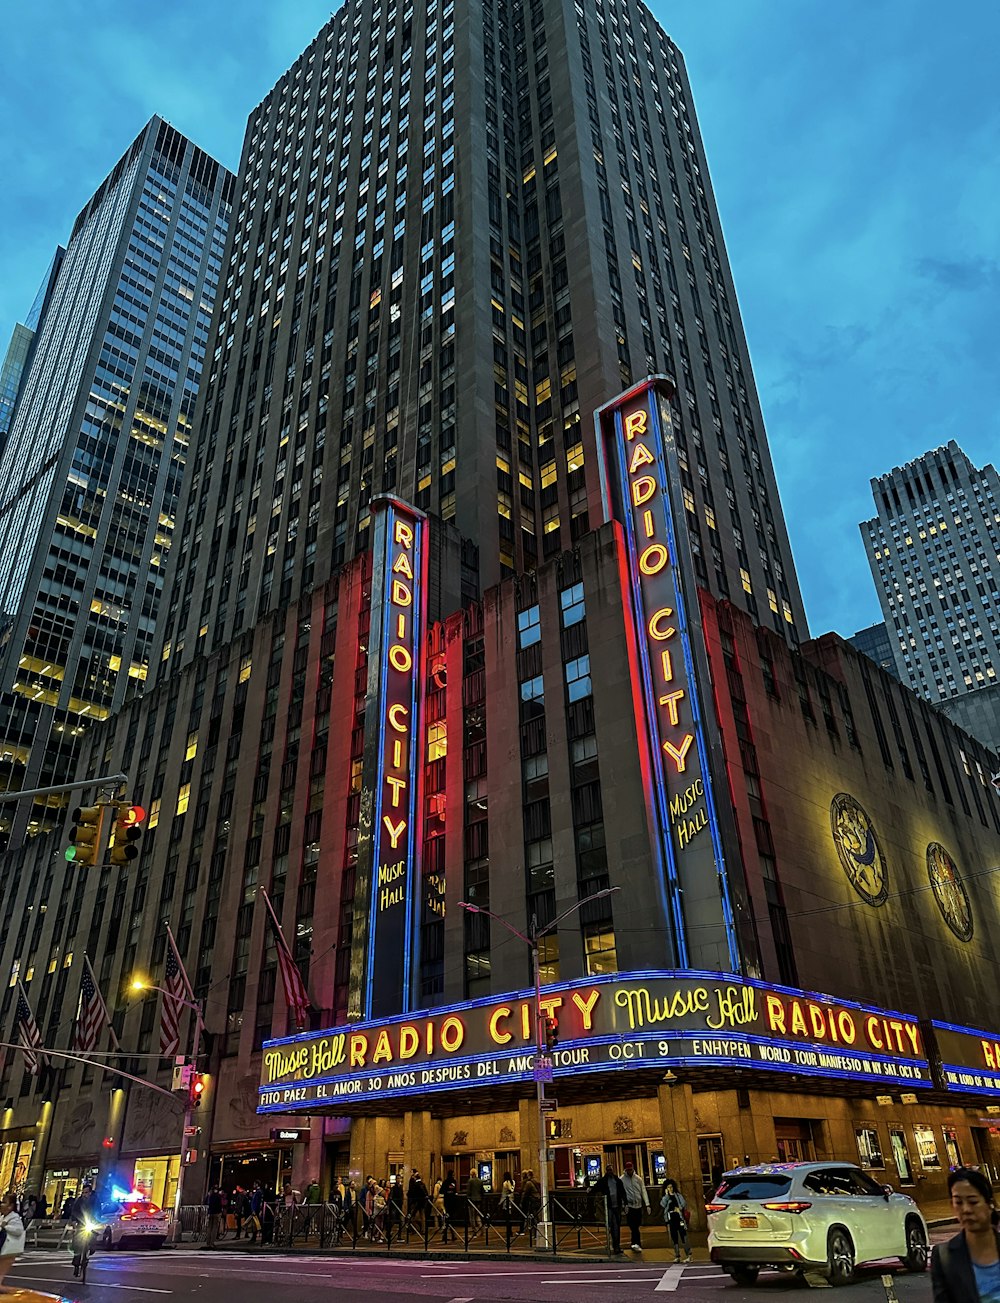 a large building with many windows with Radio City Music Hall in the background